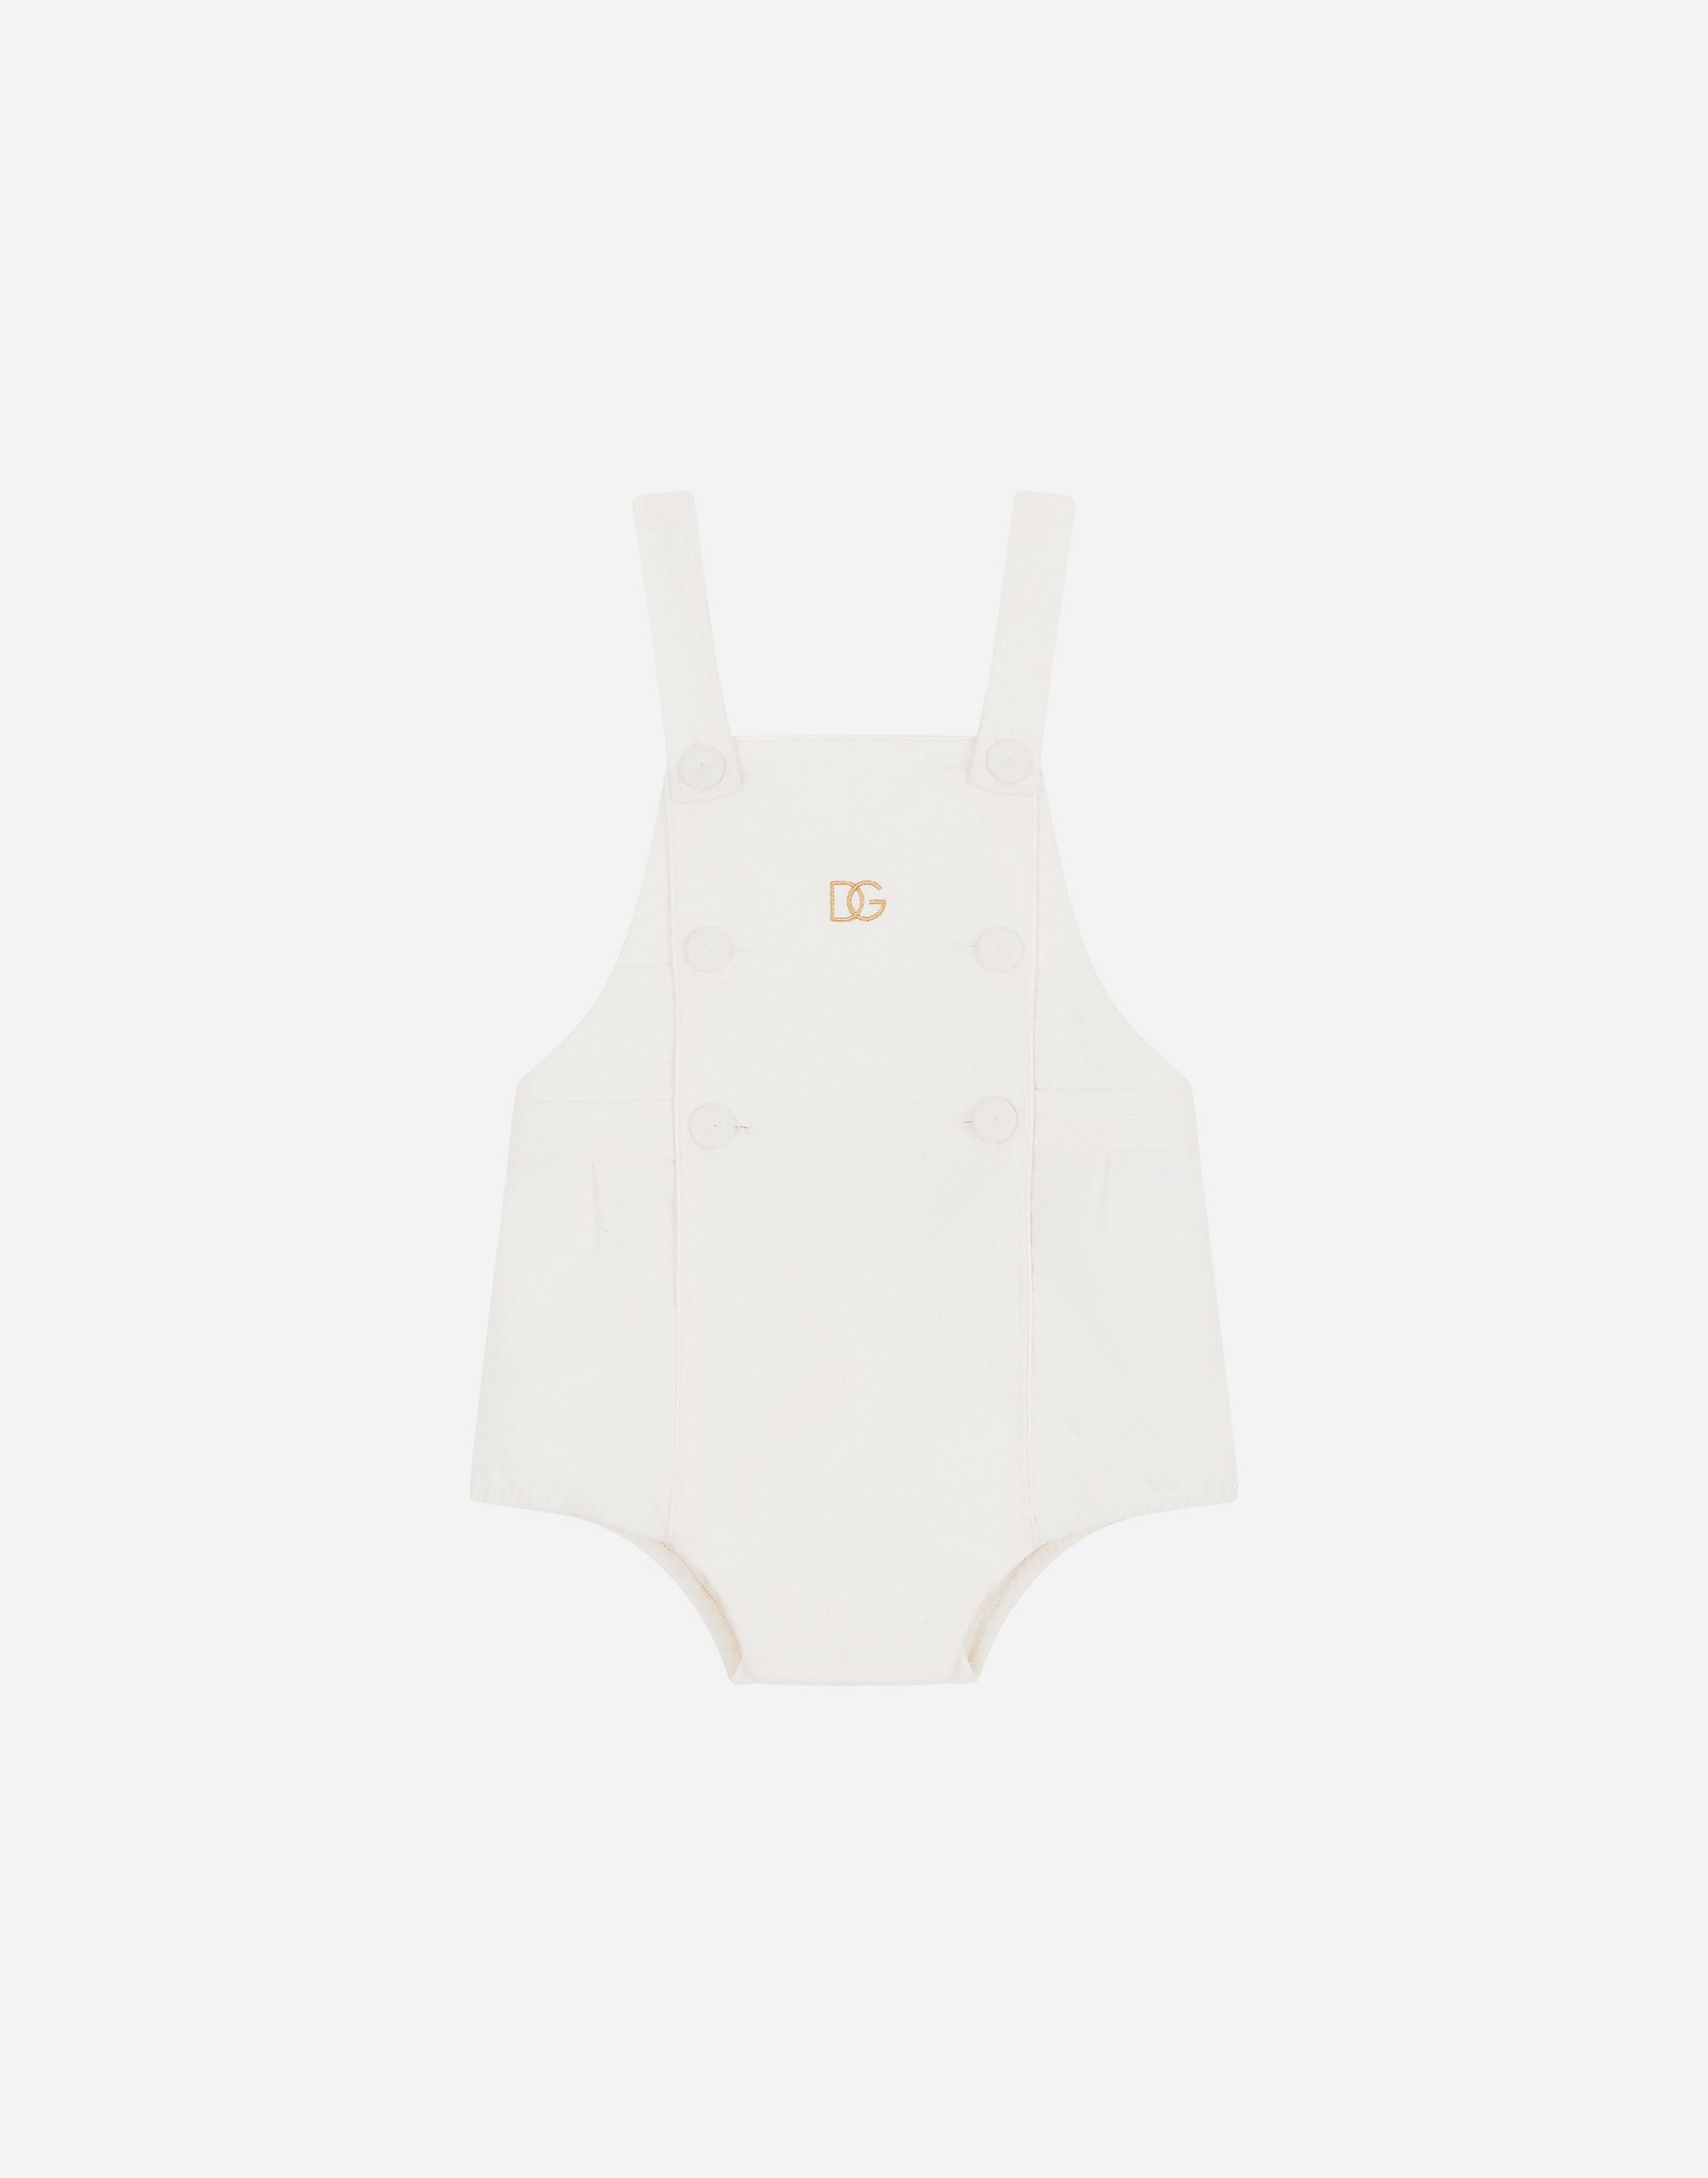 Jersey jacquard romper suit with DG embroidery in White